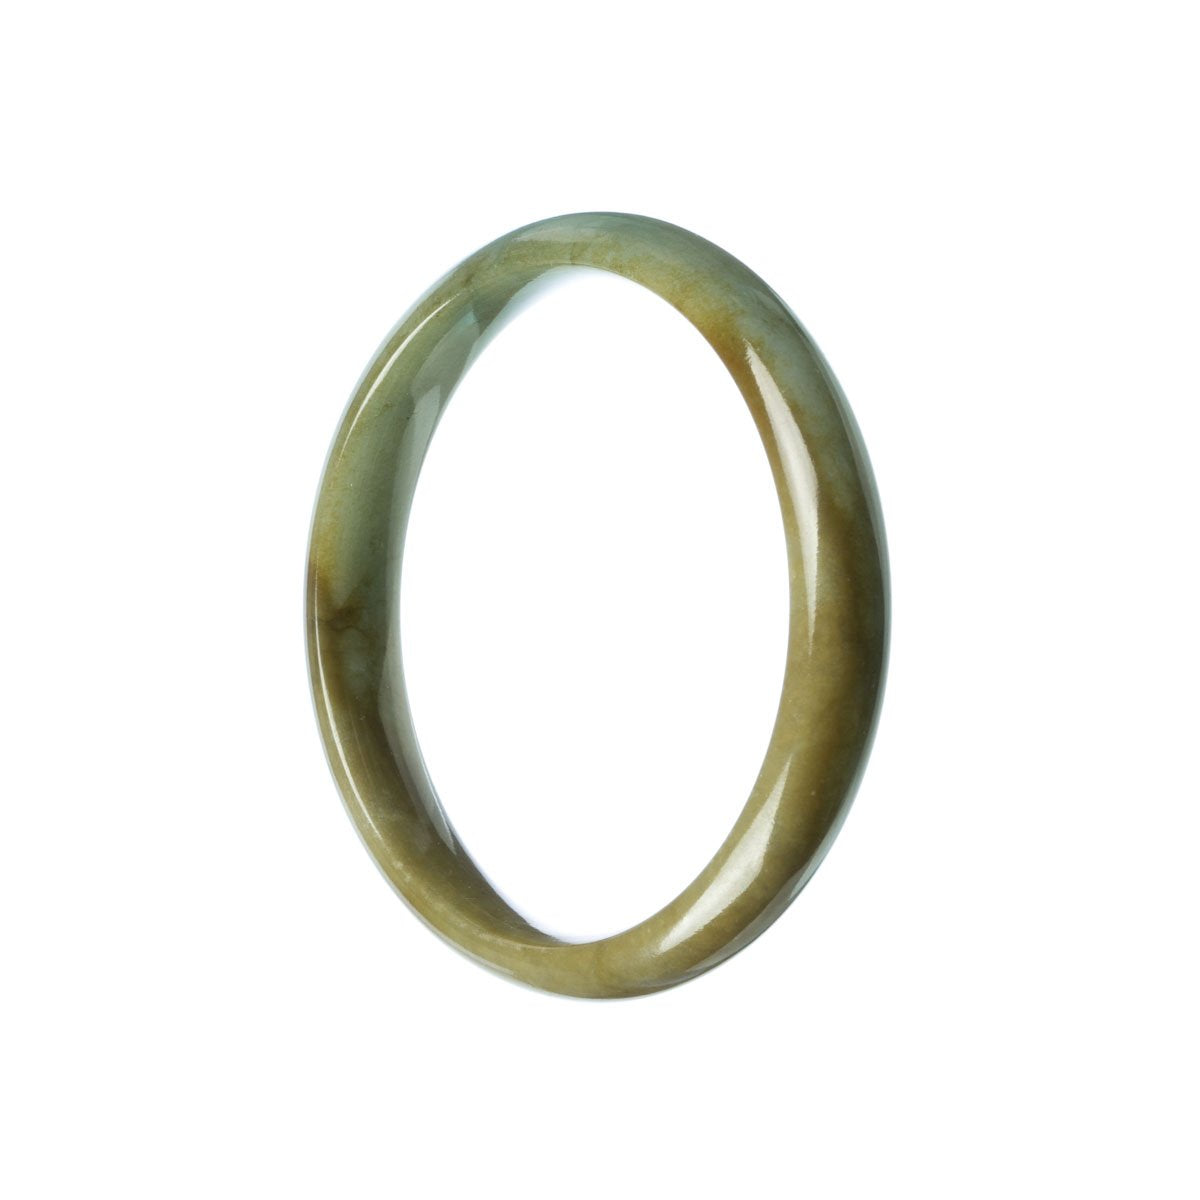 A close-up image of a genuine Type A Green Burmese Jade Bangle in a 58mm size, featuring a smooth, half-moon shape. The bangle is beautifully crafted and showcases the natural beauty of the jade stone.